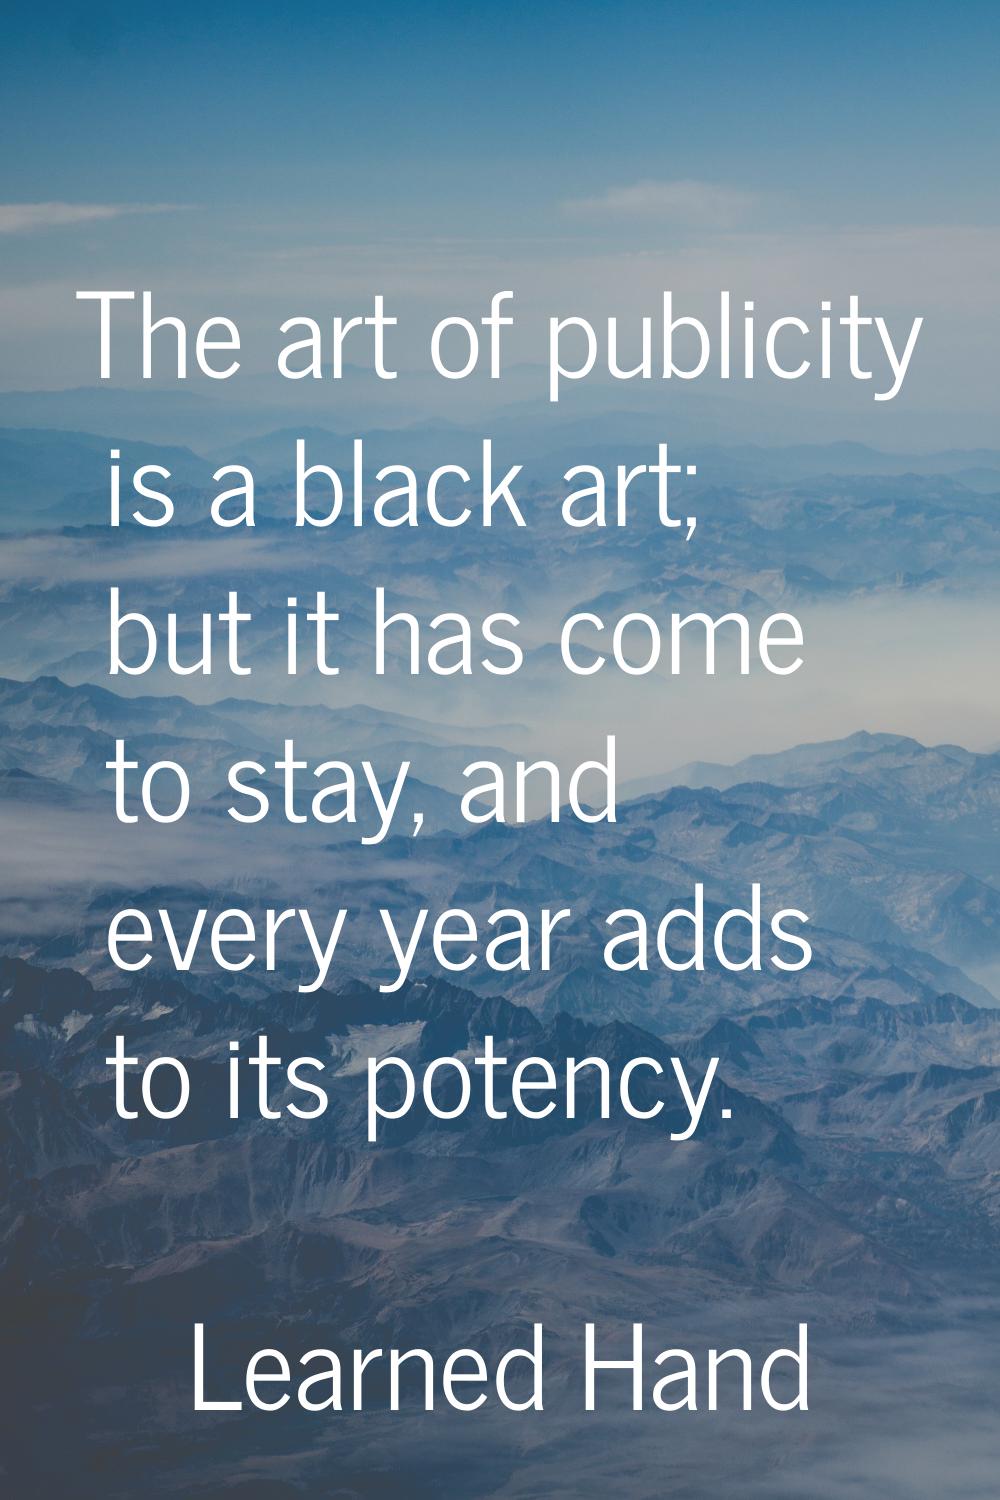 The art of publicity is a black art; but it has come to stay, and every year adds to its potency.